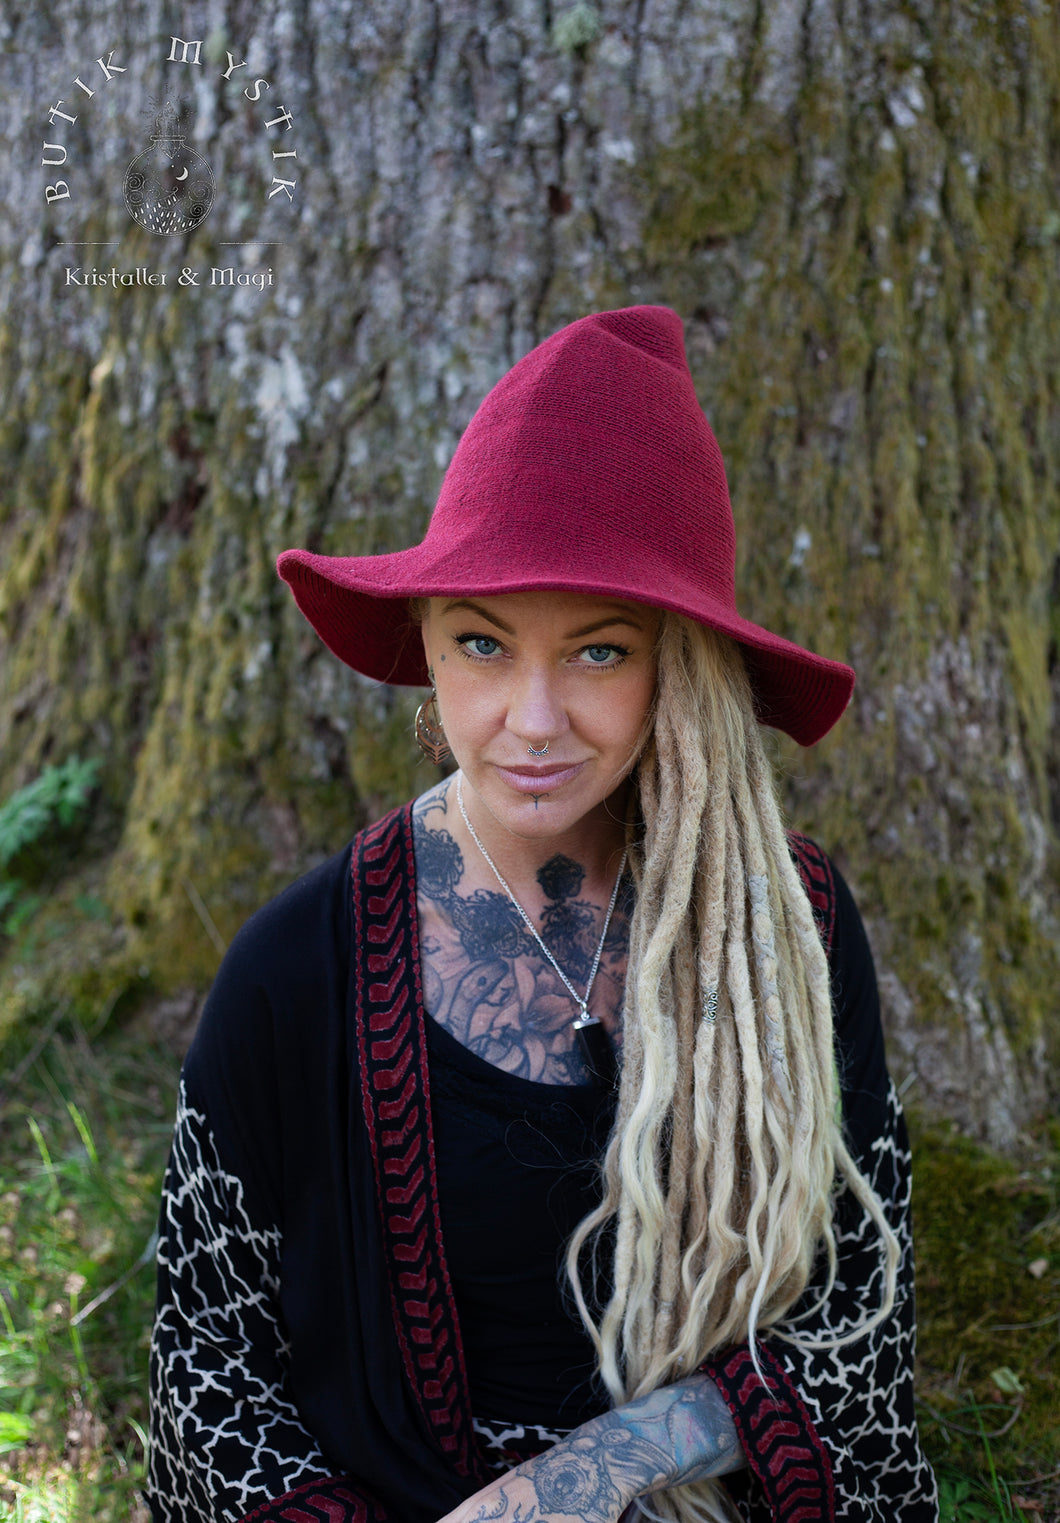 Witch hat - Red